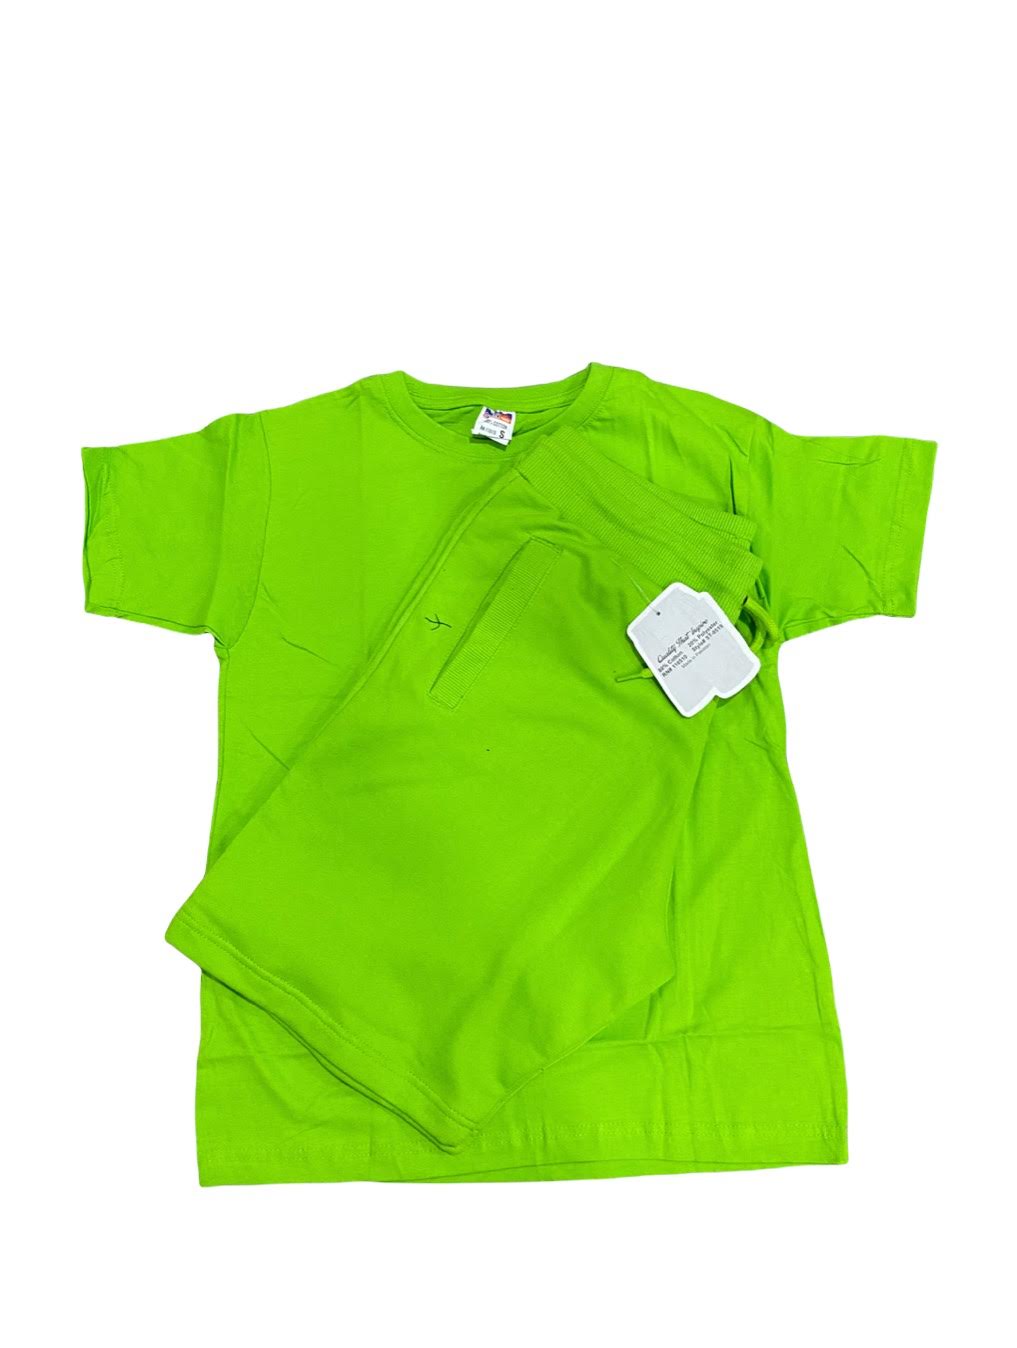 Lime green t-shirt and short sets